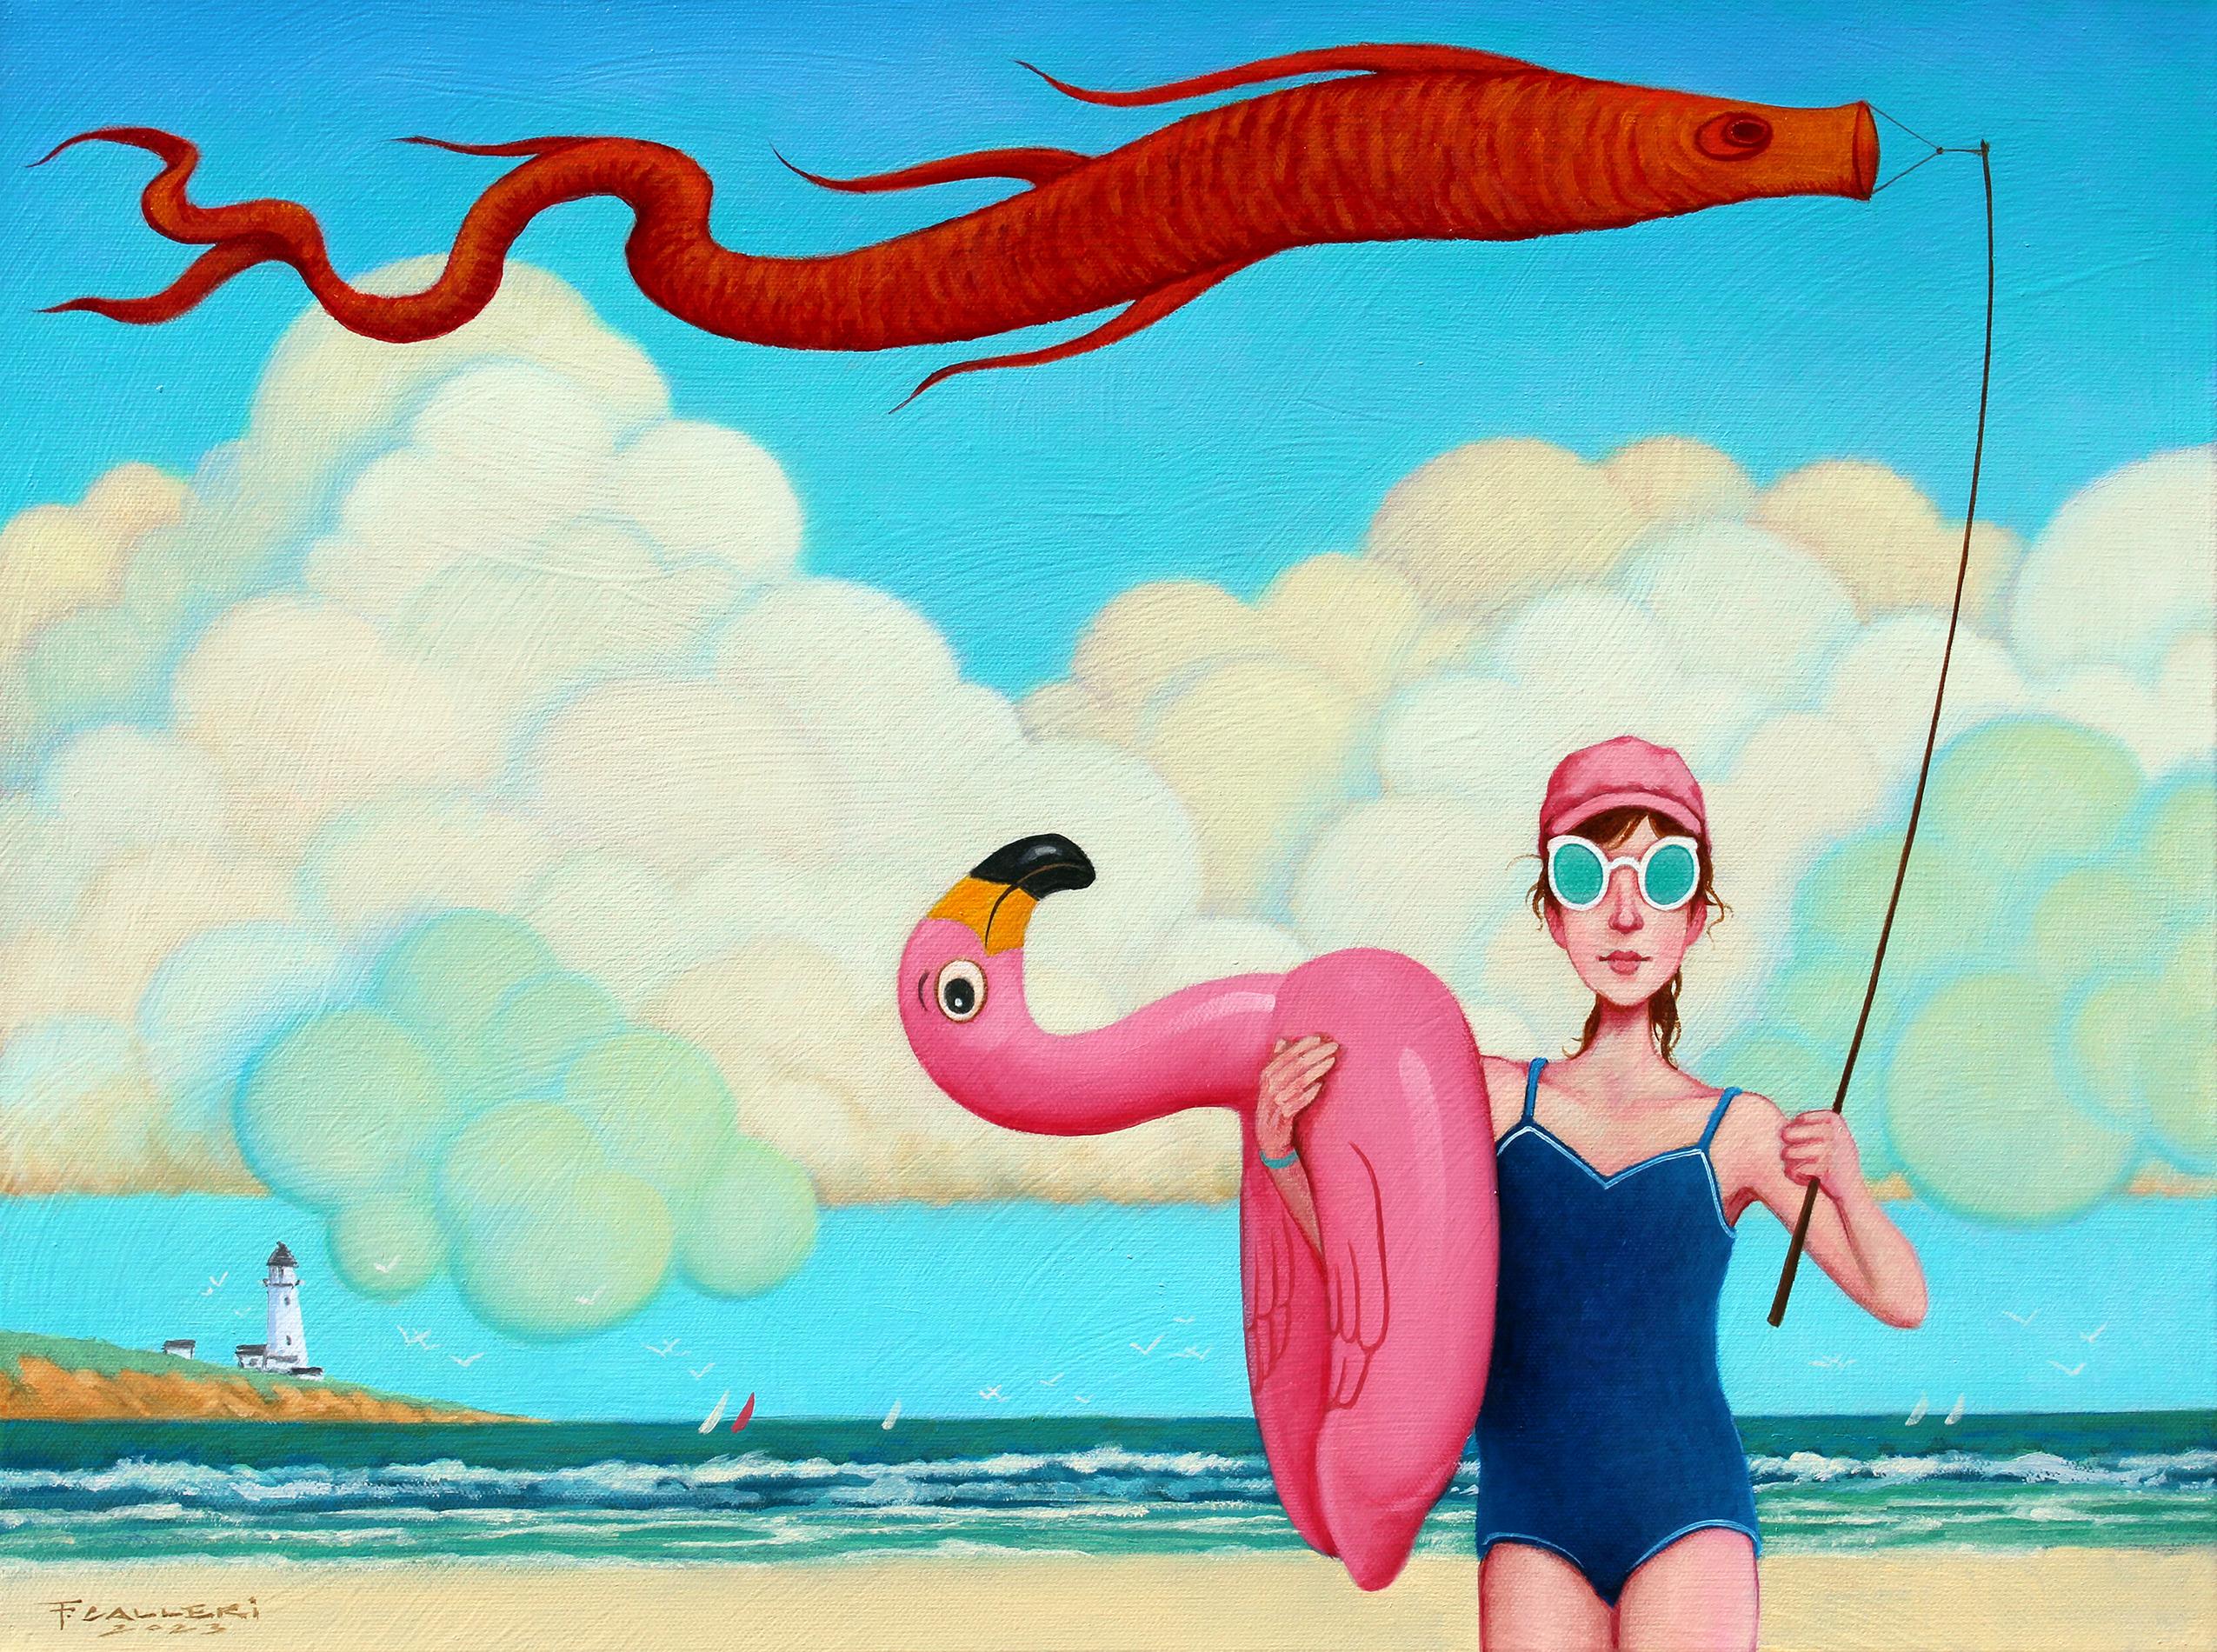 Fred Calleri Figurative Painting - "Aquatic Life" Oil painting of a girl at the beach holding a flamingo floaty